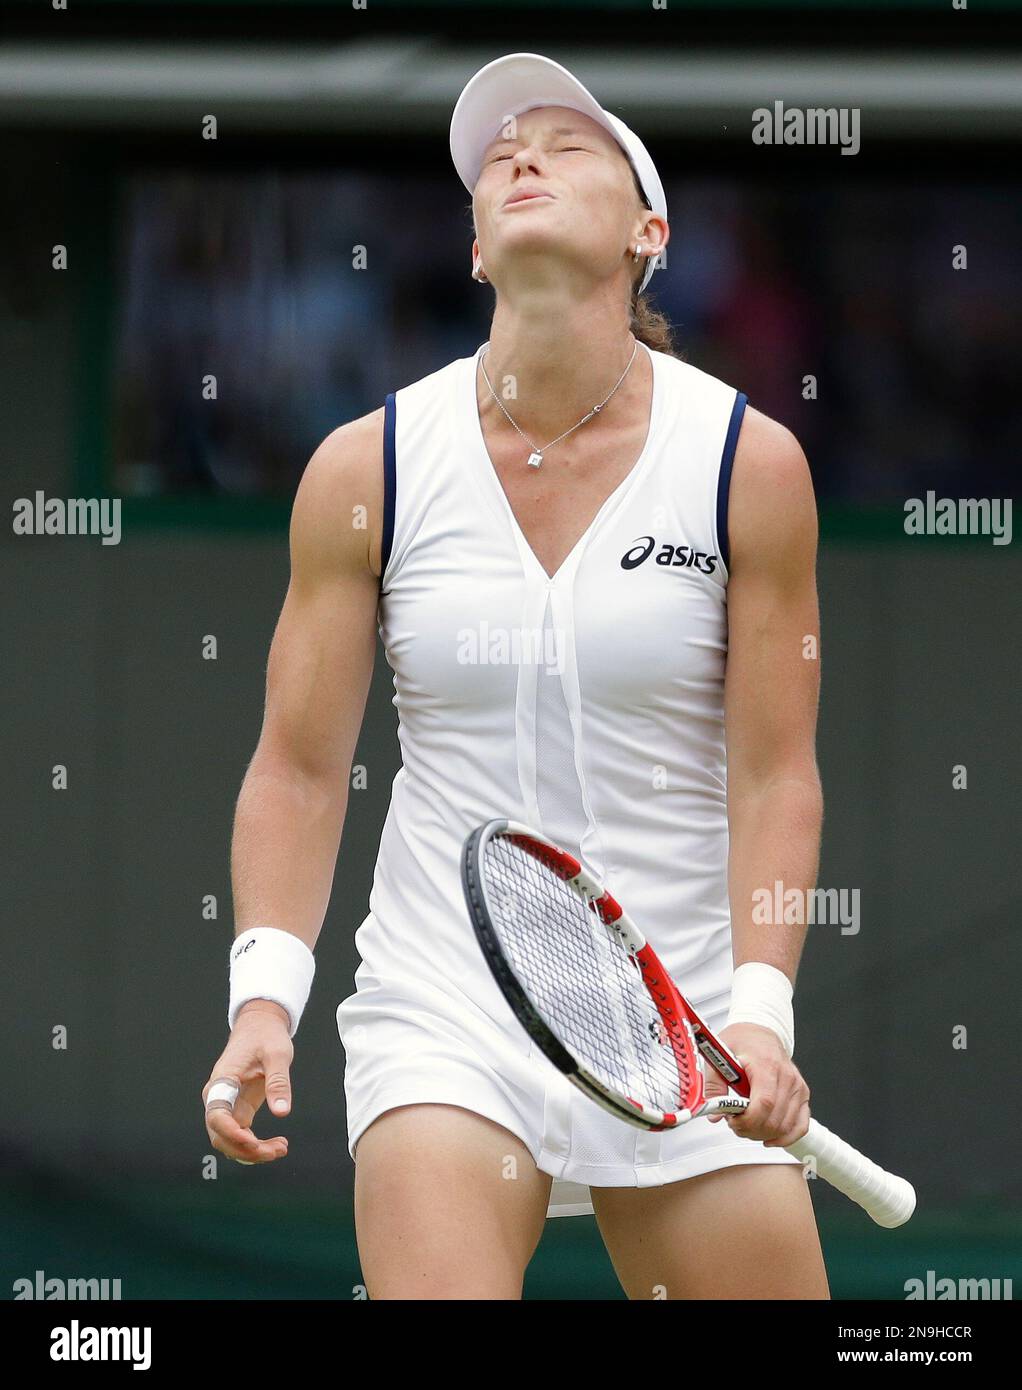 Samantha Stosur of Australia reacts during a second round women's singles  match against Arantxa Rus of Netherlands at the All England Lawn Tennis  Championships at Wimbledon, England, Wednesday, June 27, 2012. (AP